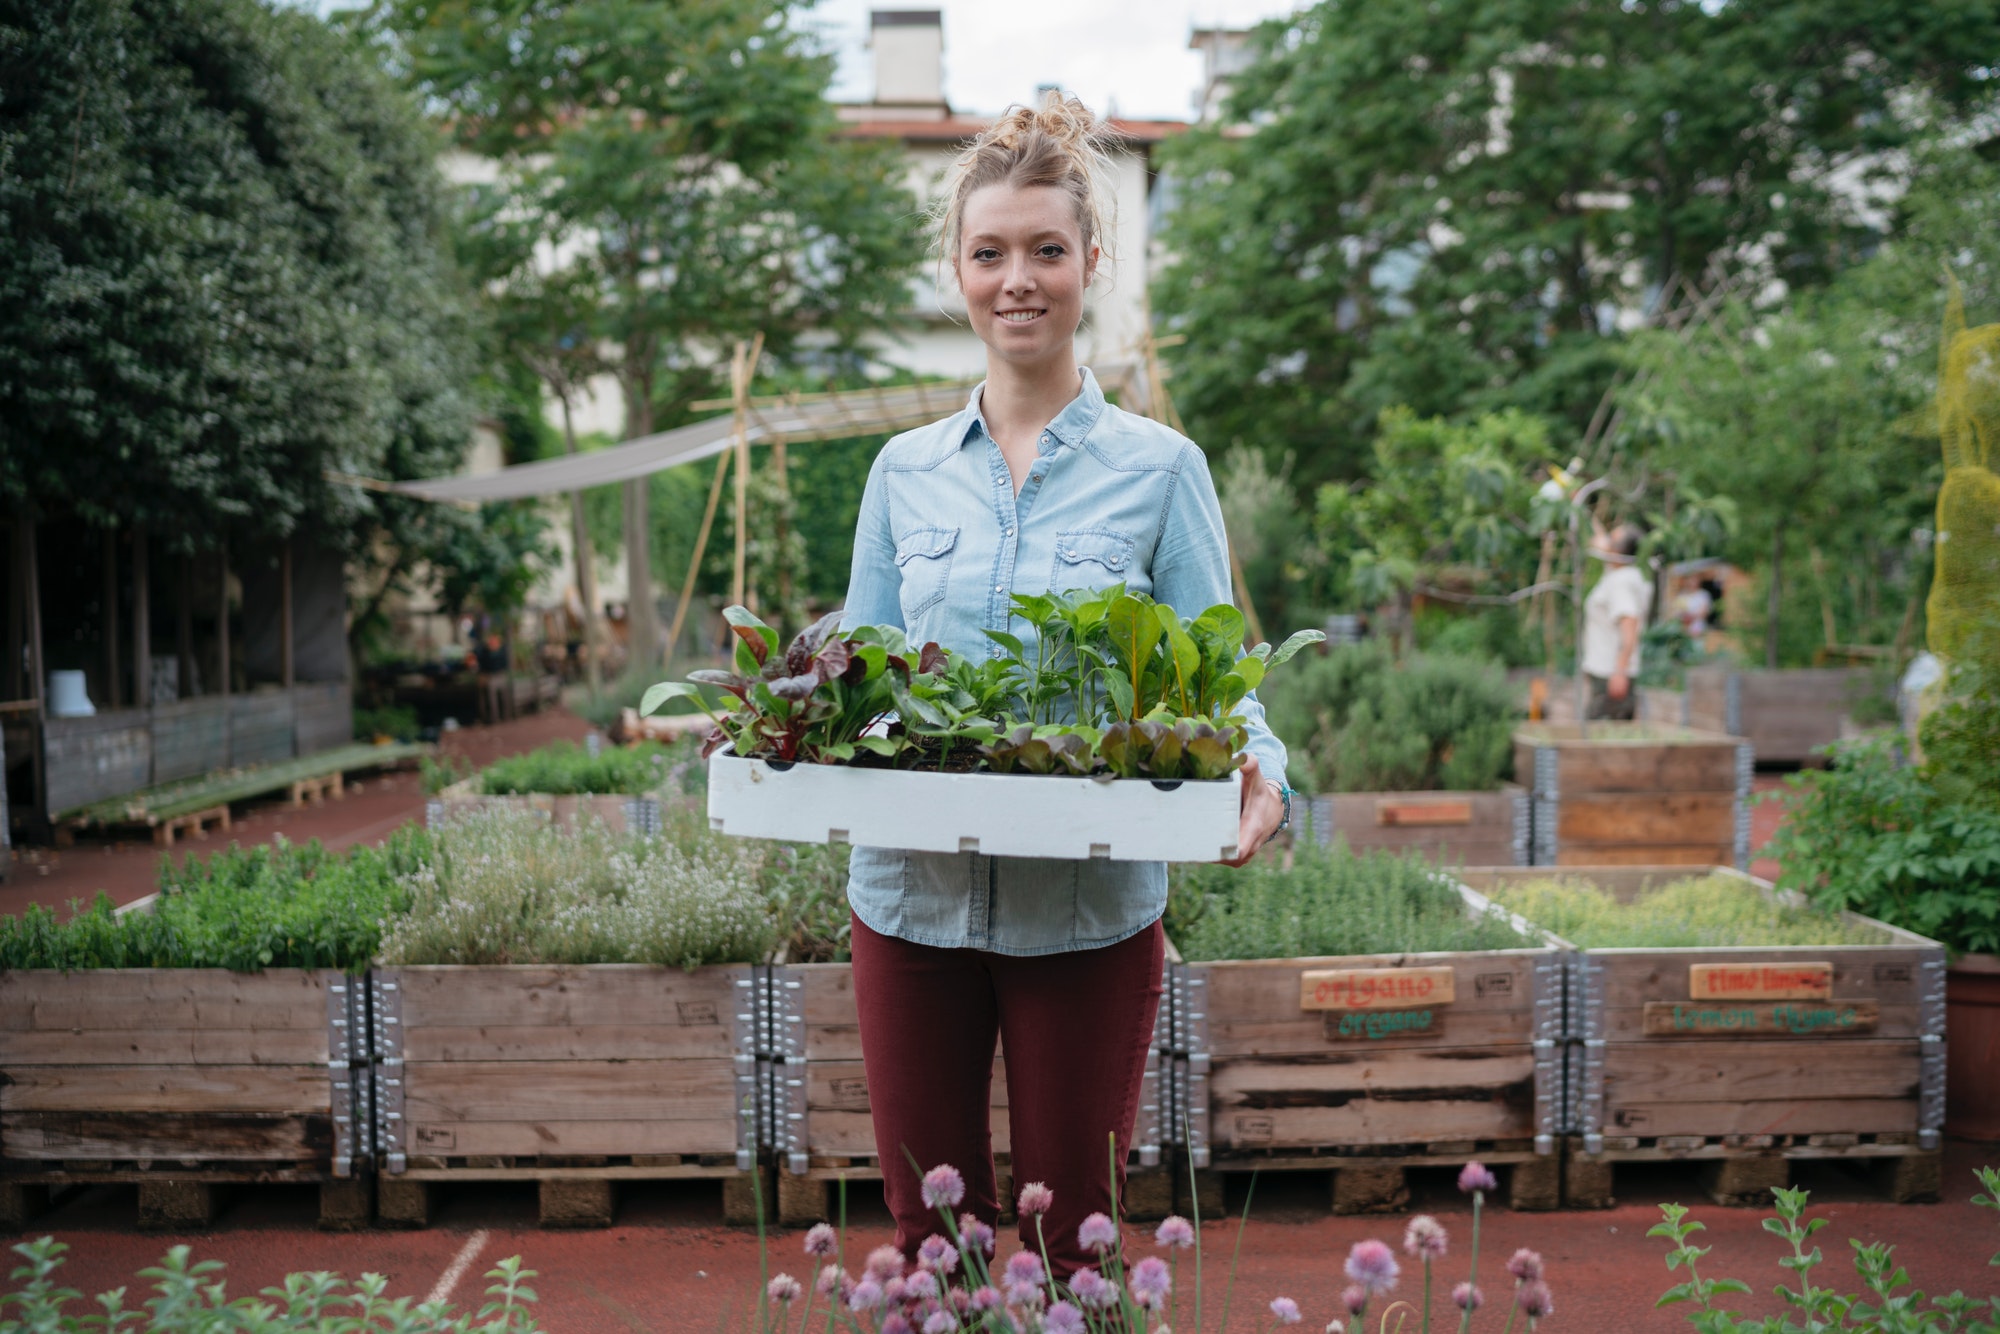 Woman in garden holding tray of plants